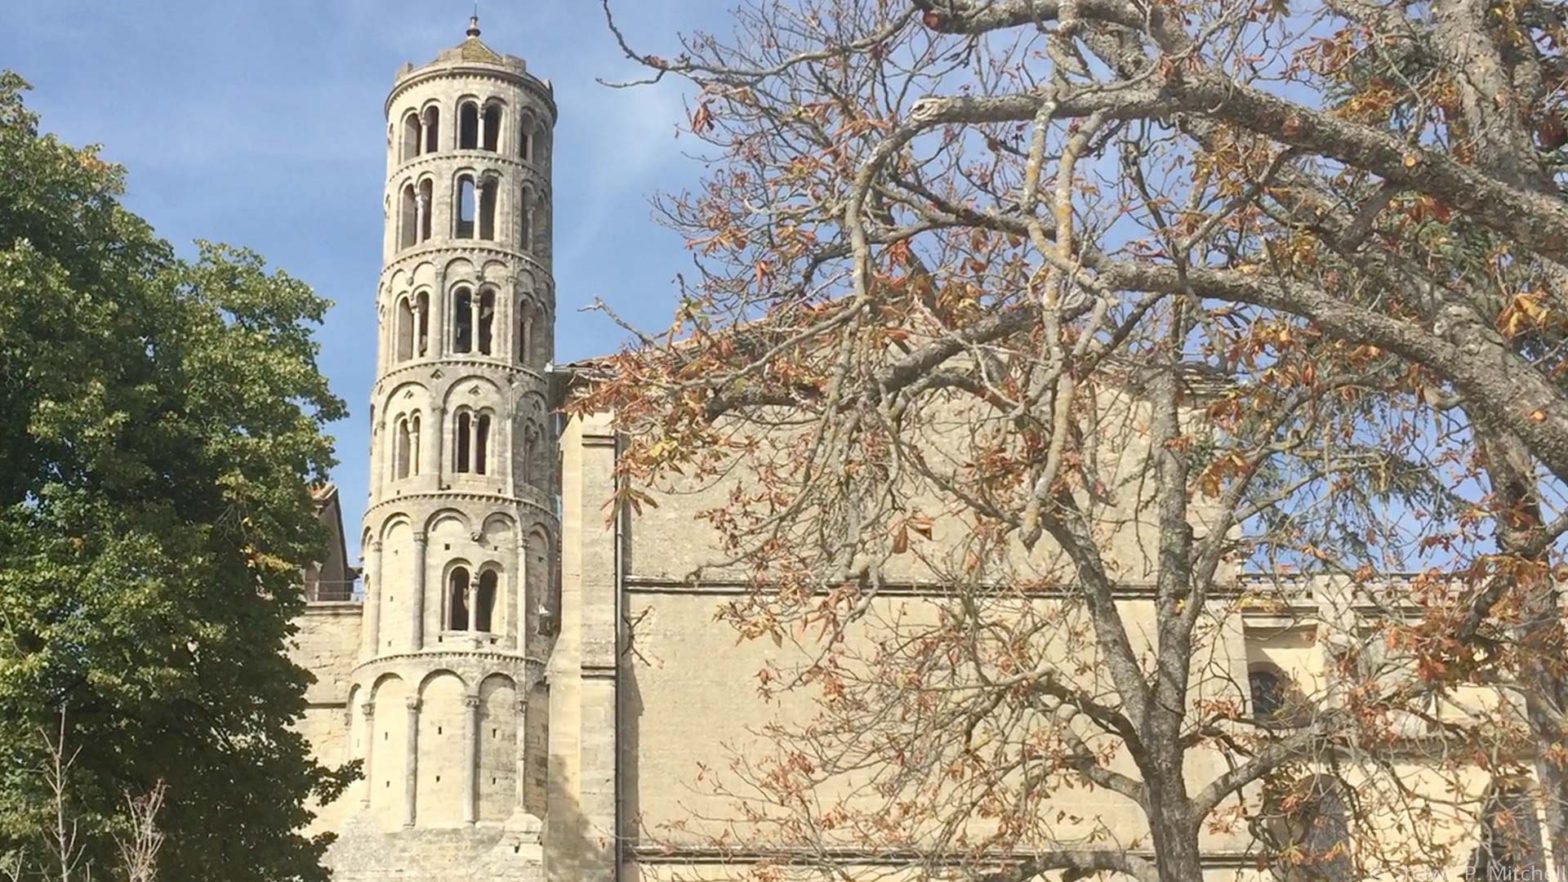 The old tower in Uzes, France.